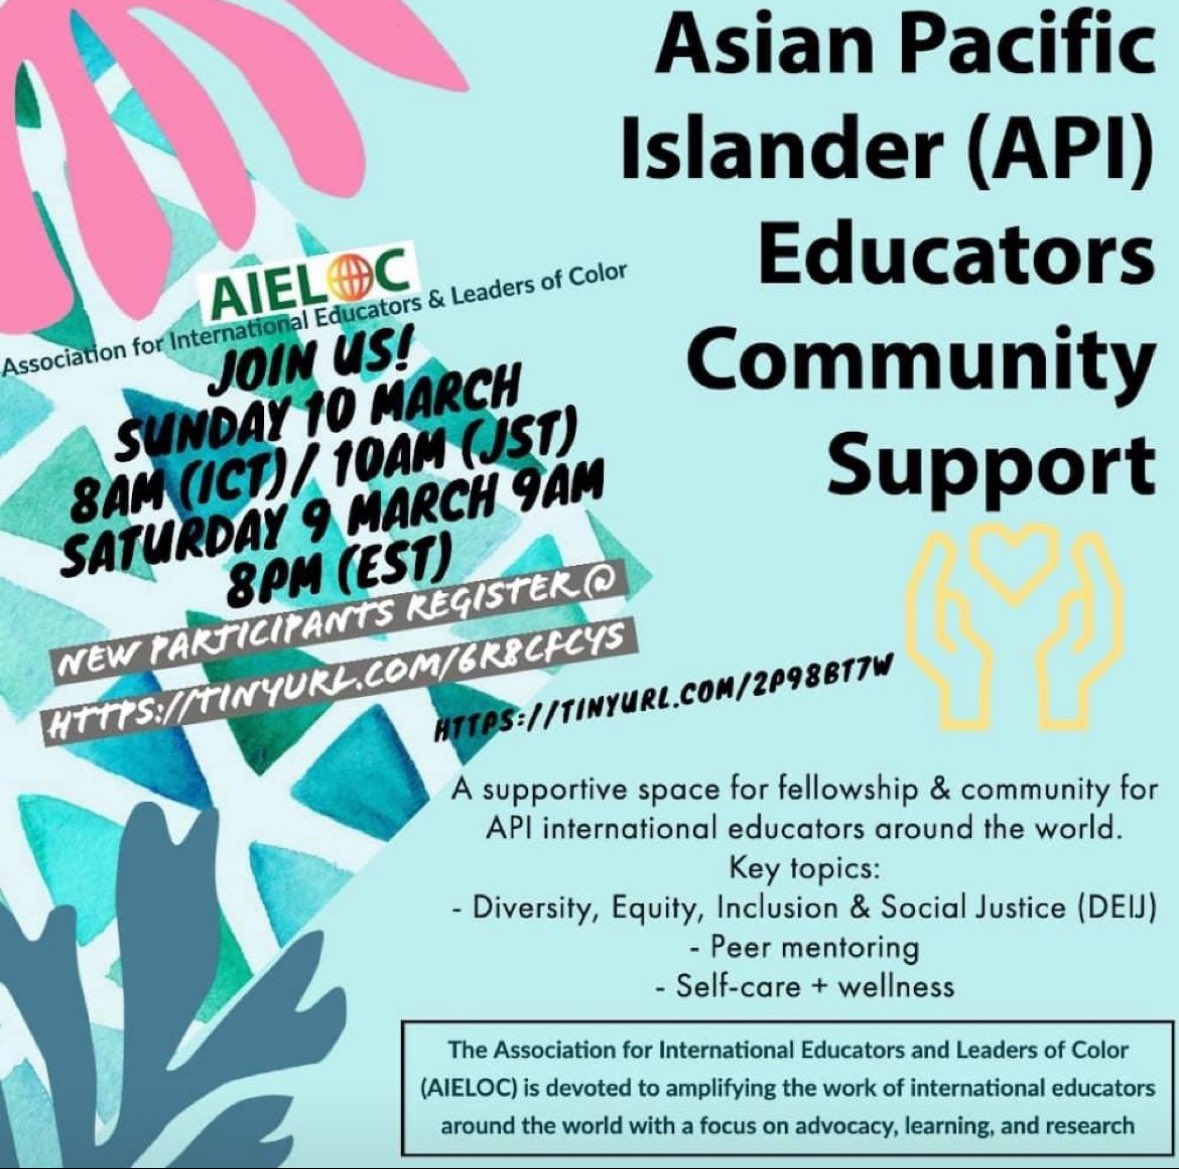 Come join the API Int’l Educator Affinity group on March 10th! Register at tinyurl.com/GR8CFCYS. Thank you @KanakoSuwa and Aiko for hosting. #affinity #API #intlELOC